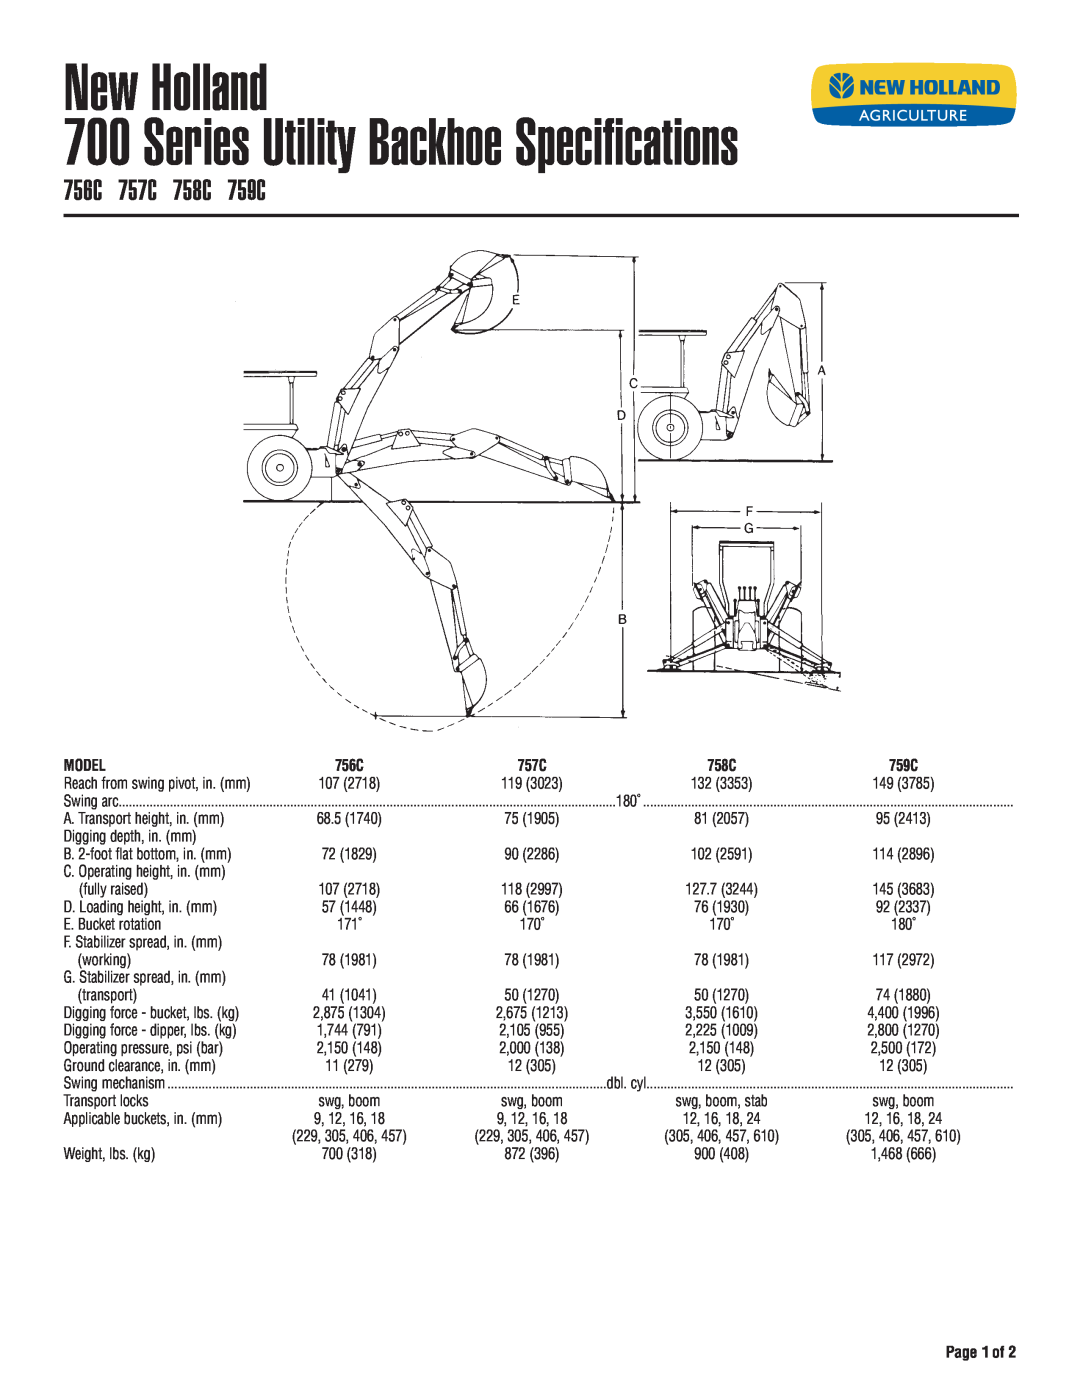 New Holland specifications New Holland, 756C 757C 758C 759C, Model, Page 1 of, Series Utility Backhoe Specifications 